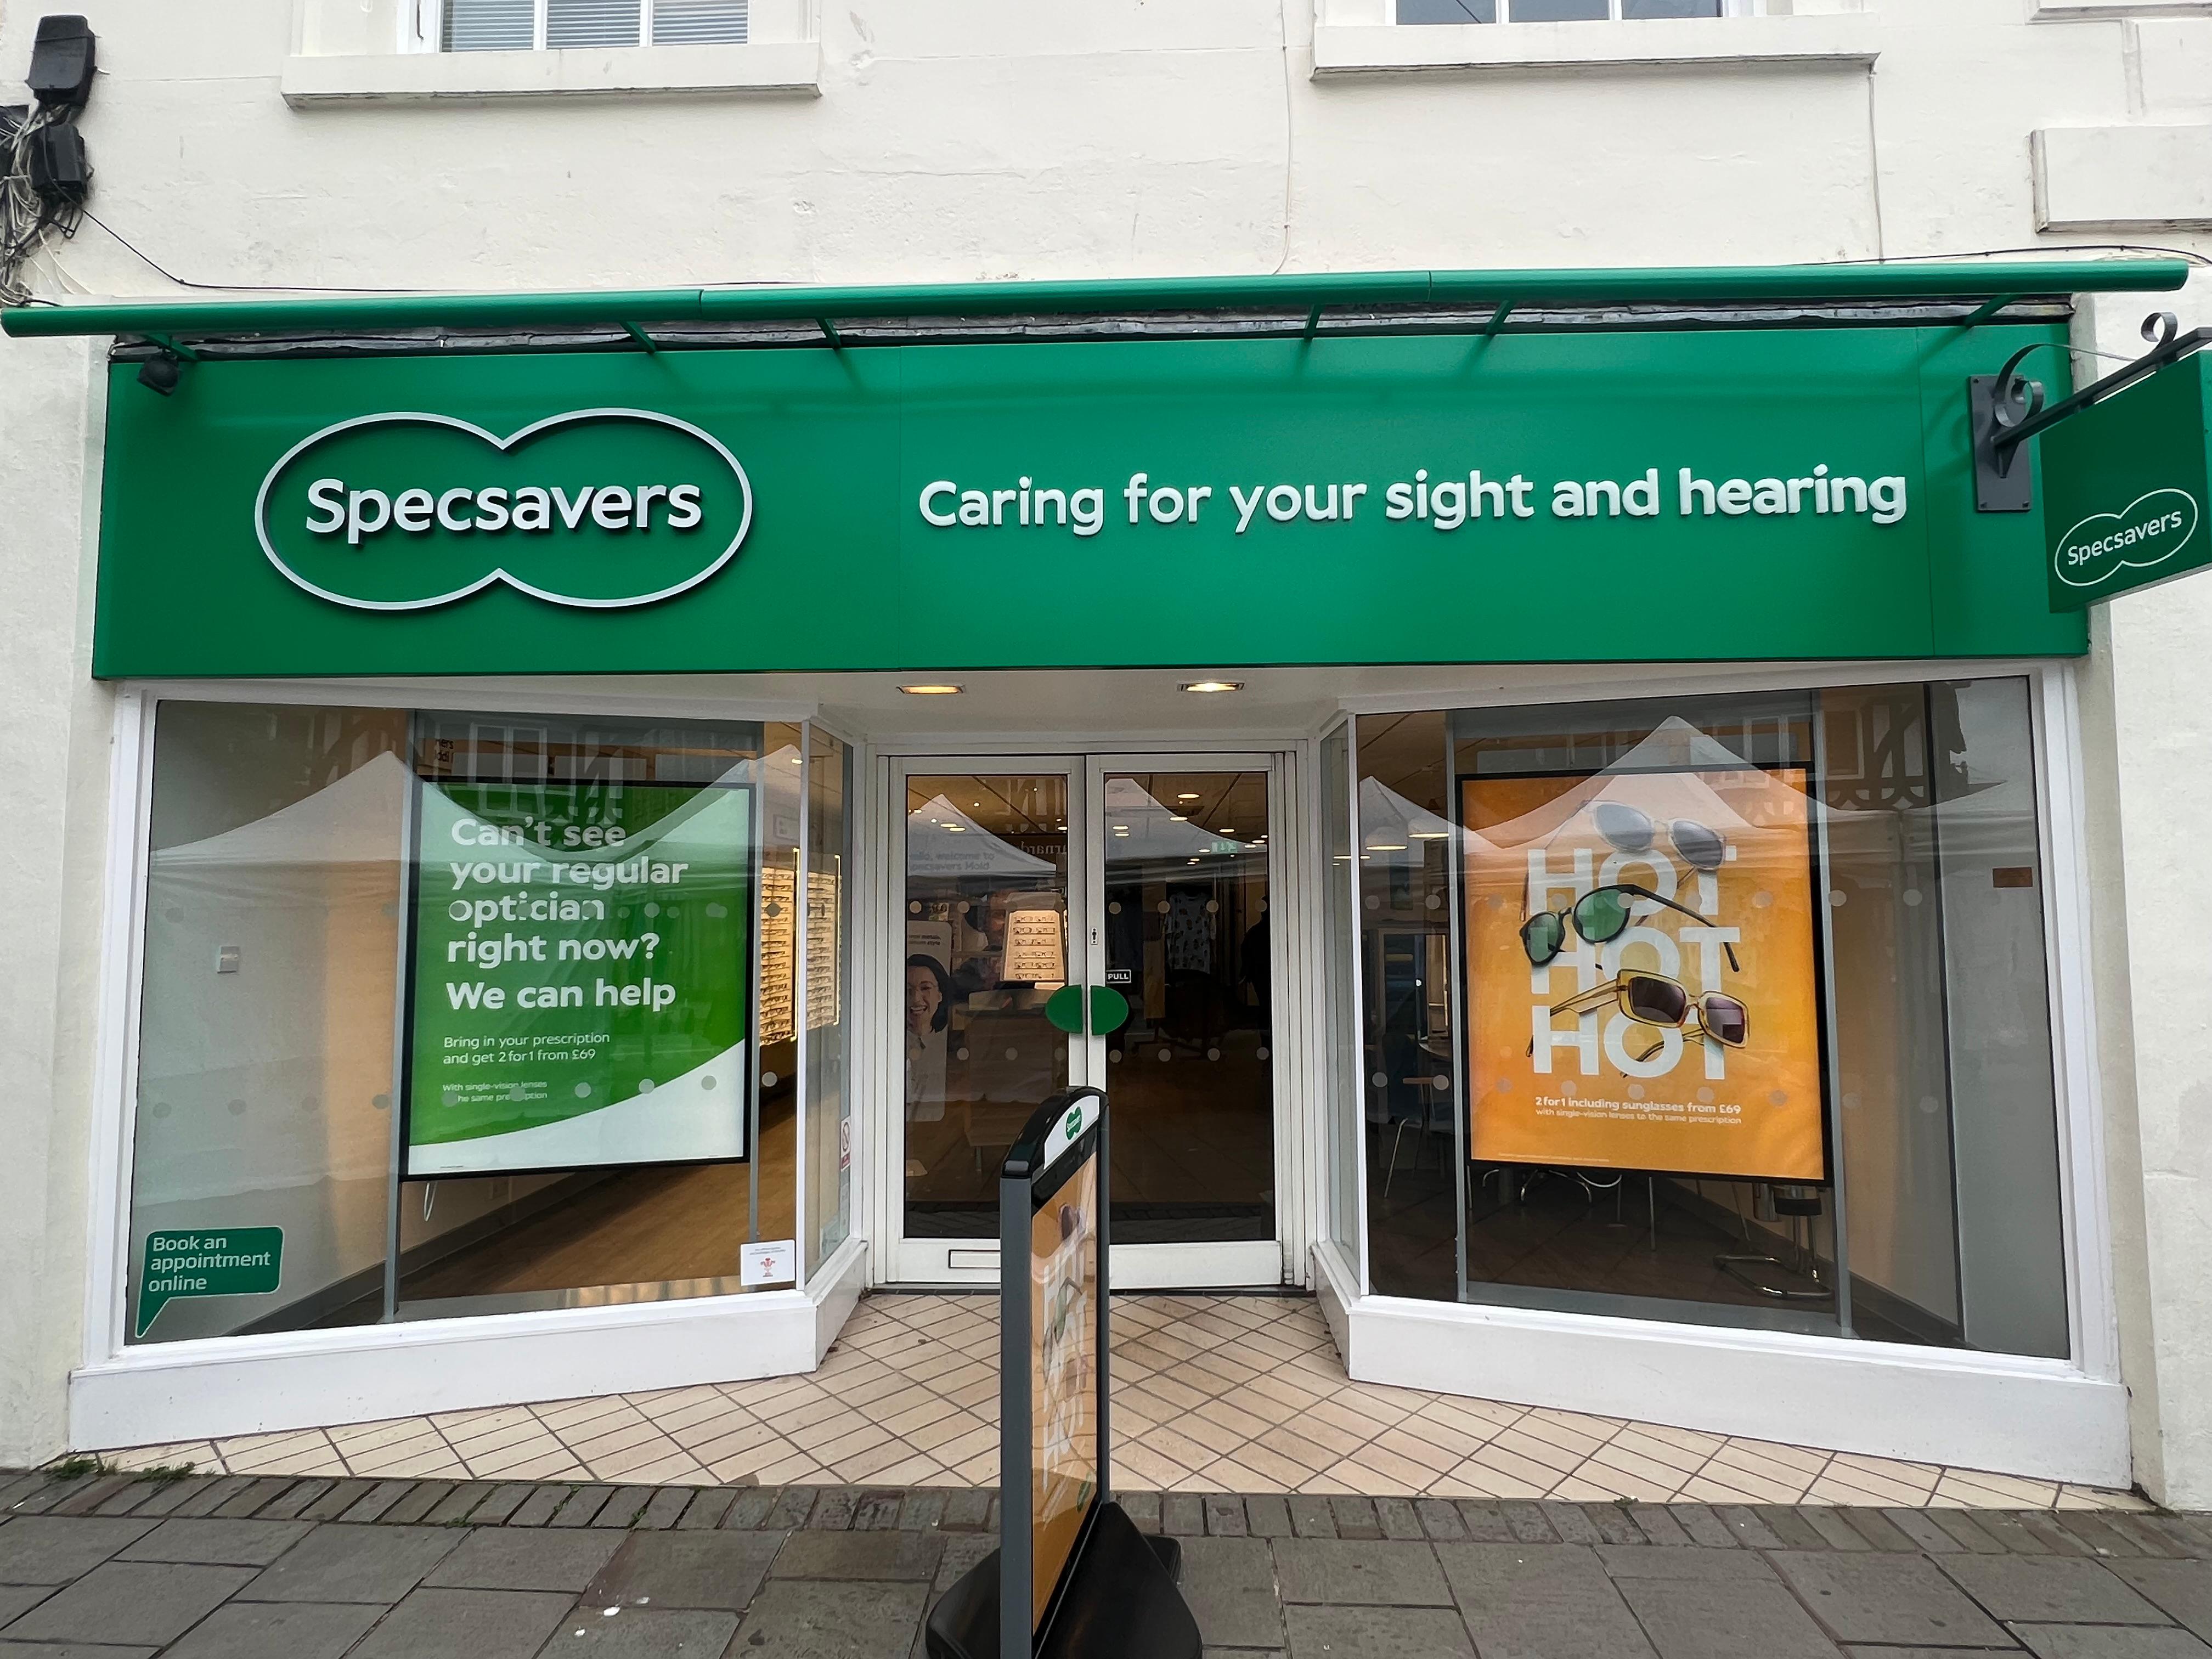 Specsavers Mold Specsavers Opticians and Audiologists - Mold Mold 01352 705090